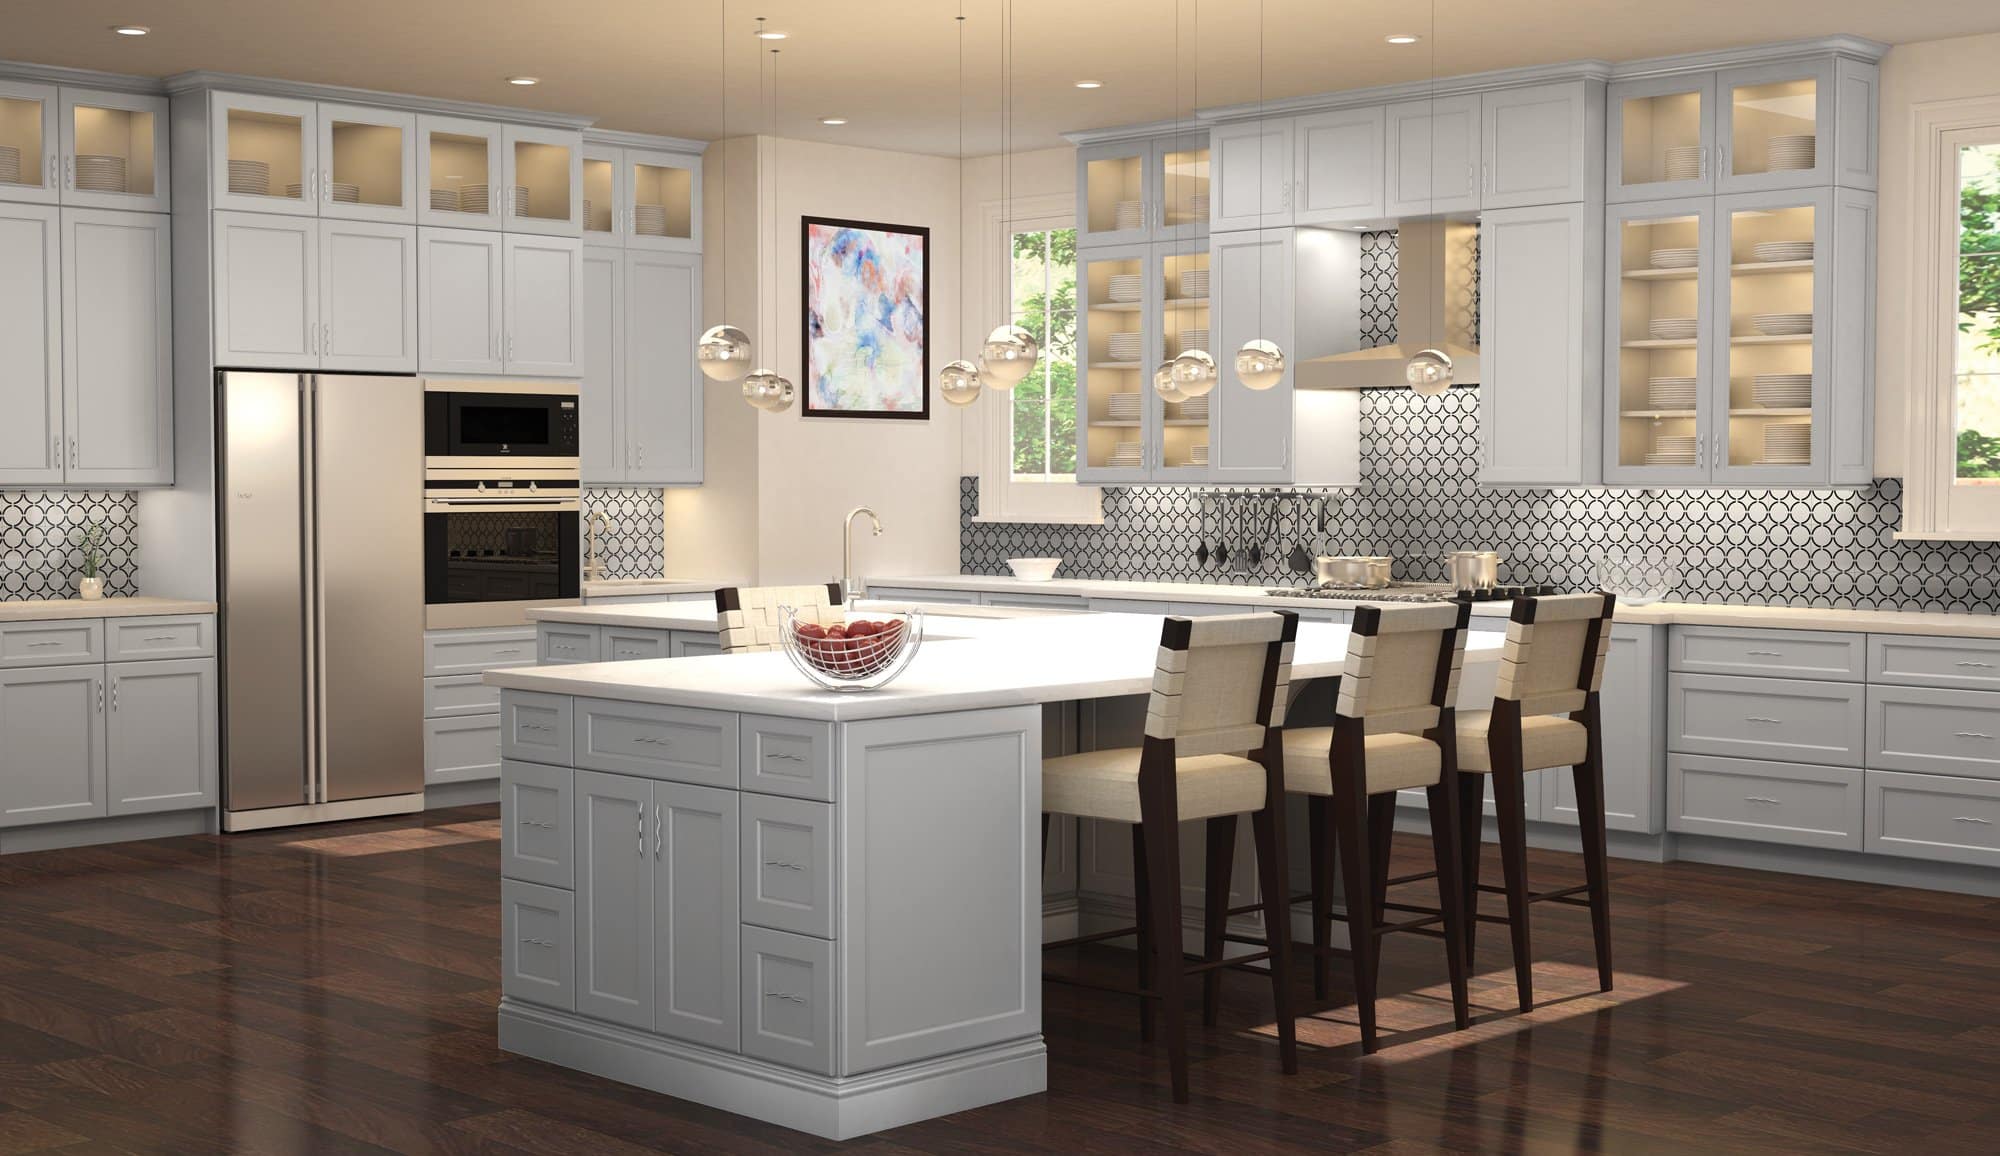  affordable cabinets and countertops in Atlanta